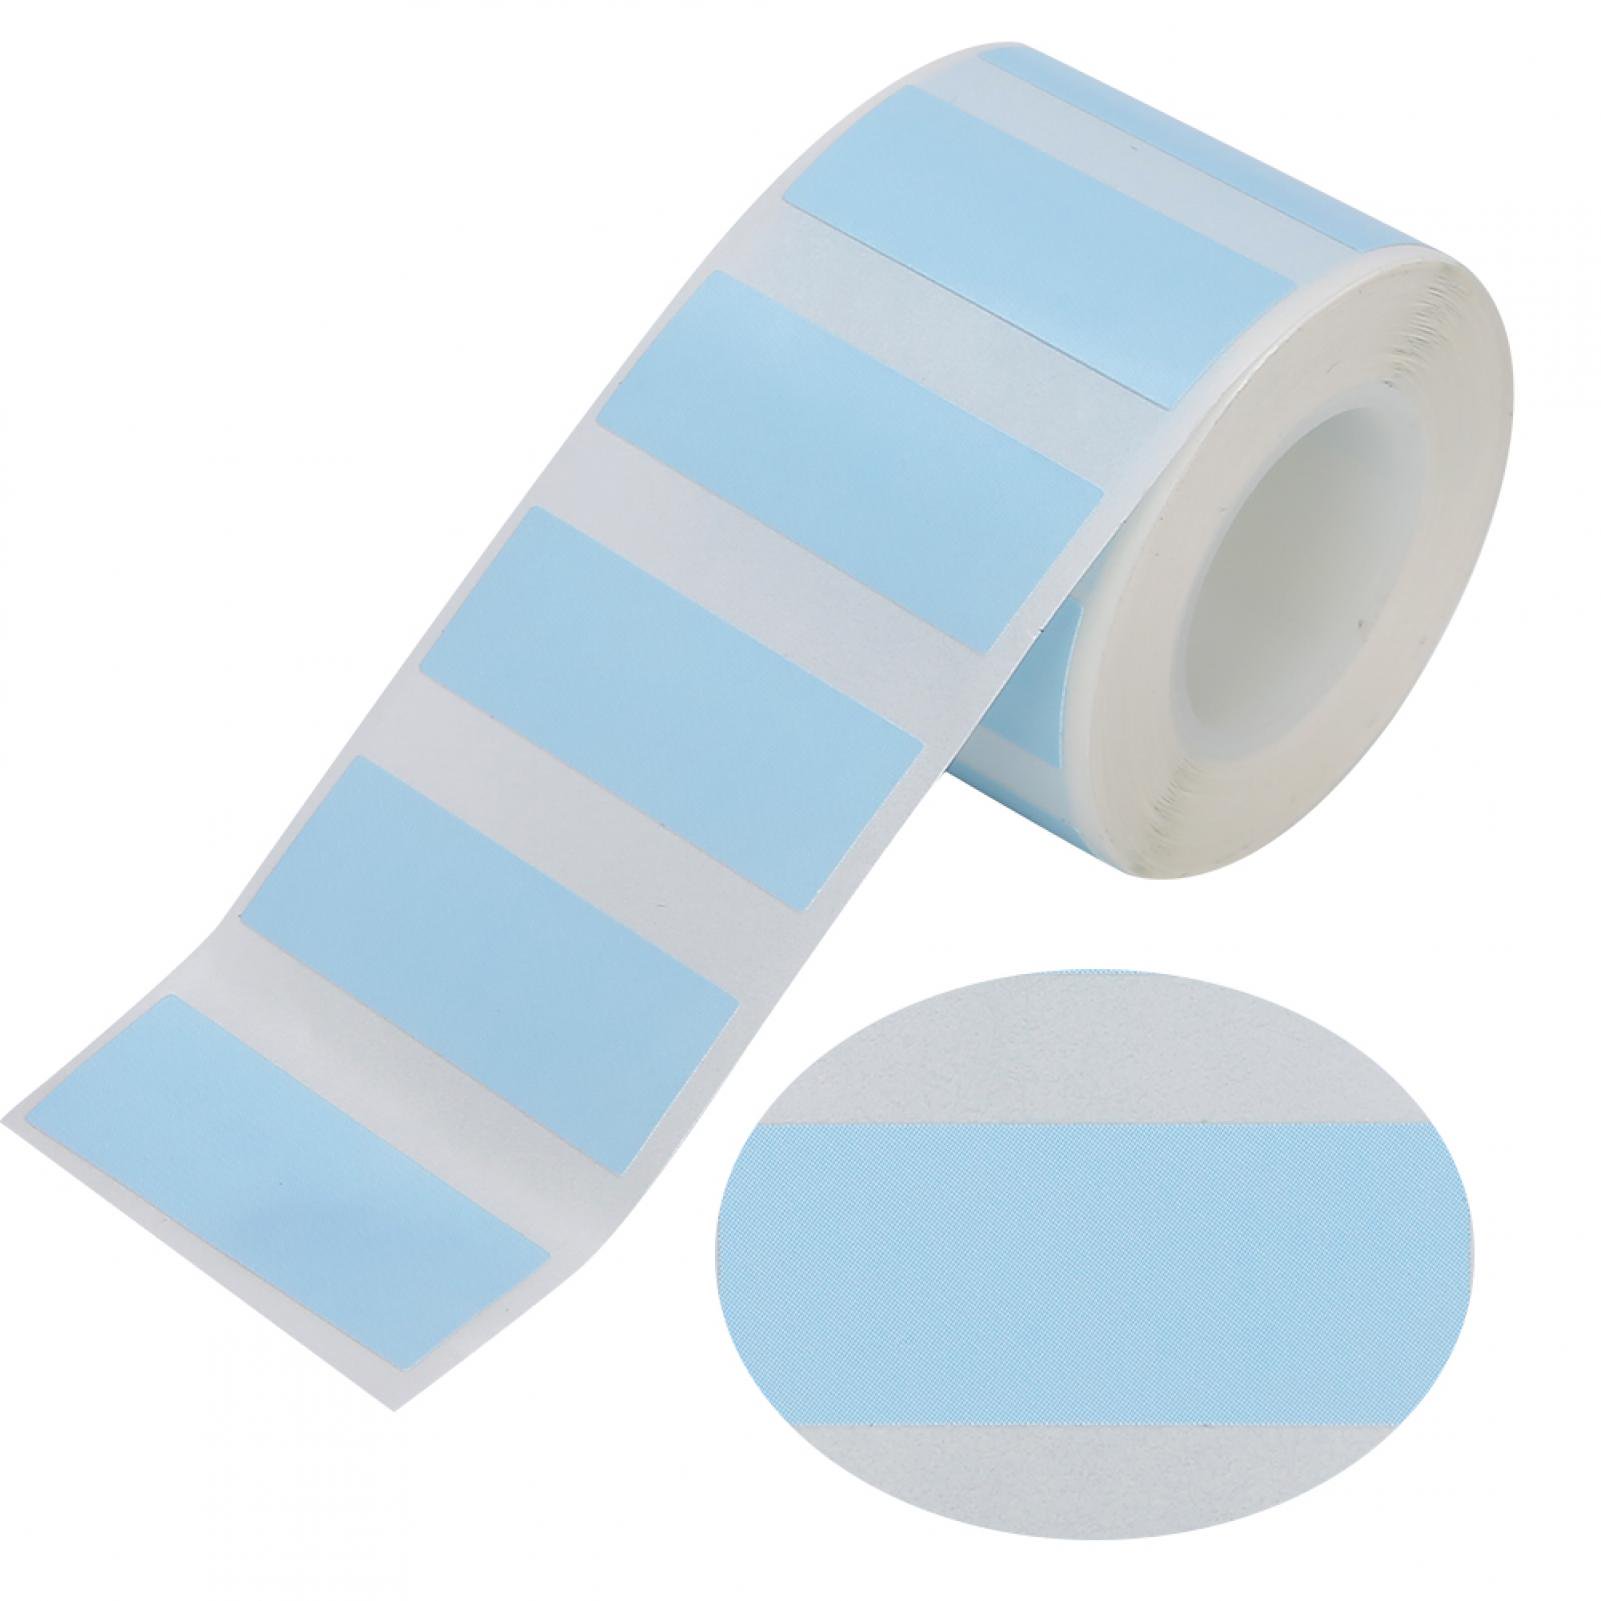 1.2x0.5in Waterproof Thermal Label Paper Adhesive Blue Color For Printer EQ11 Store Packing Bag,Thermal Label,Printer Accessory